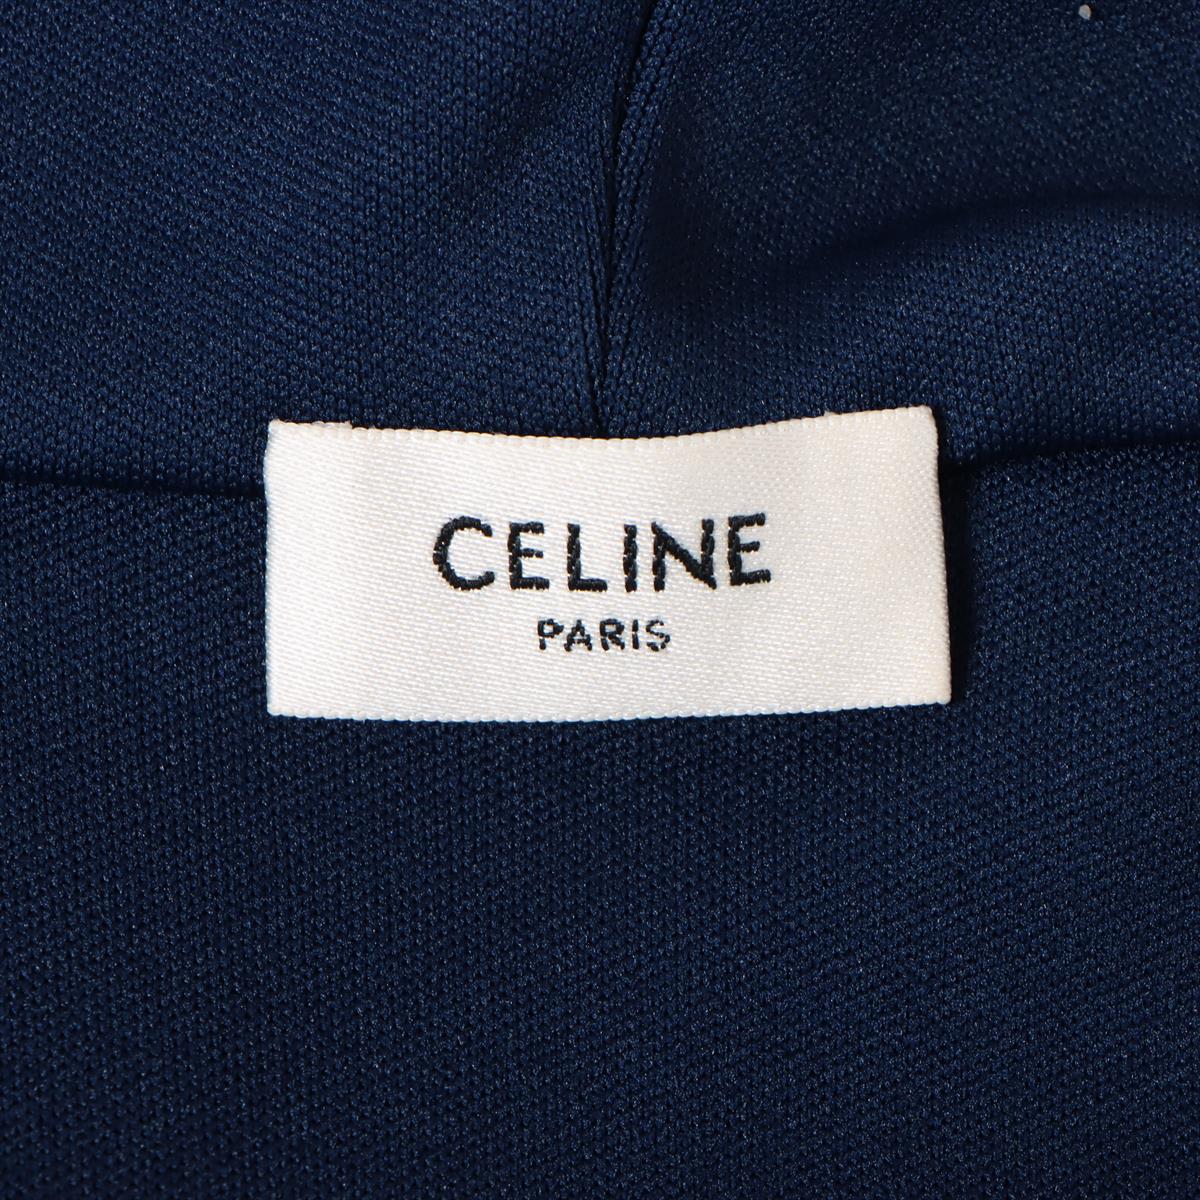 CELINE Triomphe 23SS Cotton & polyester Sweatsuit S Men's White x navy  tracksuit jacket classic fit 2Y58B121O